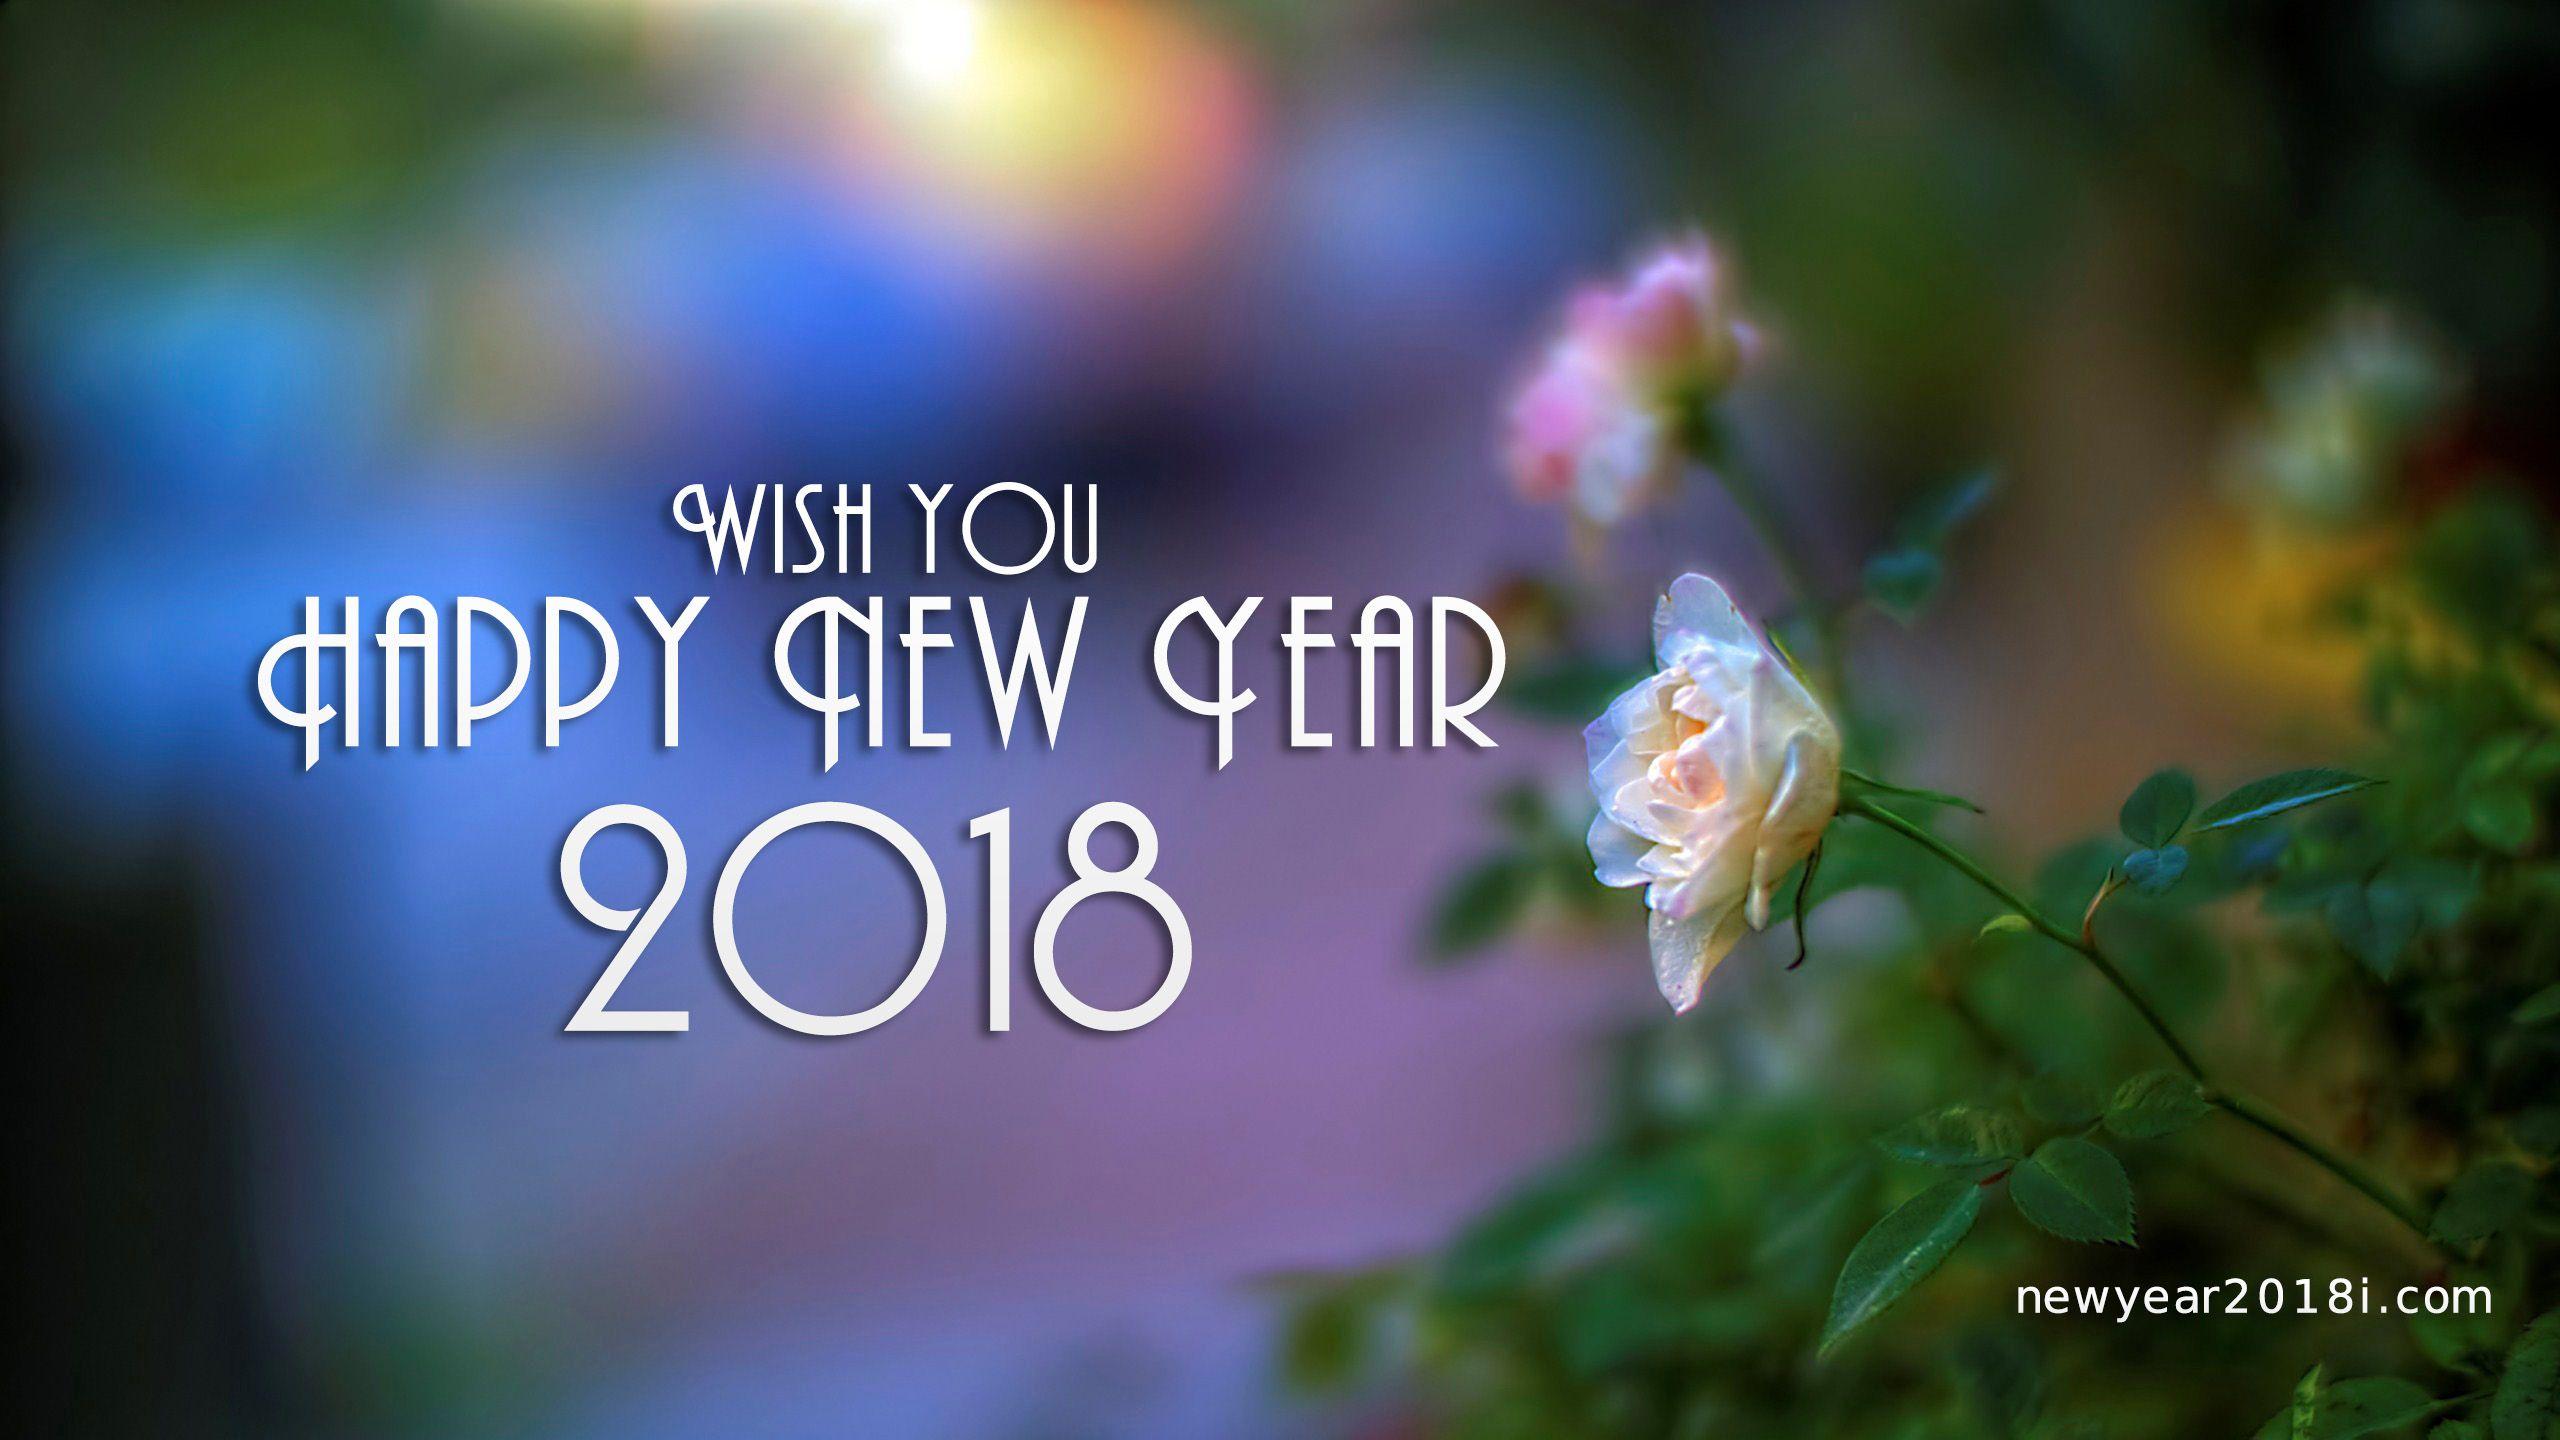 Happy New Year 2018, Image, Quotes, Sms